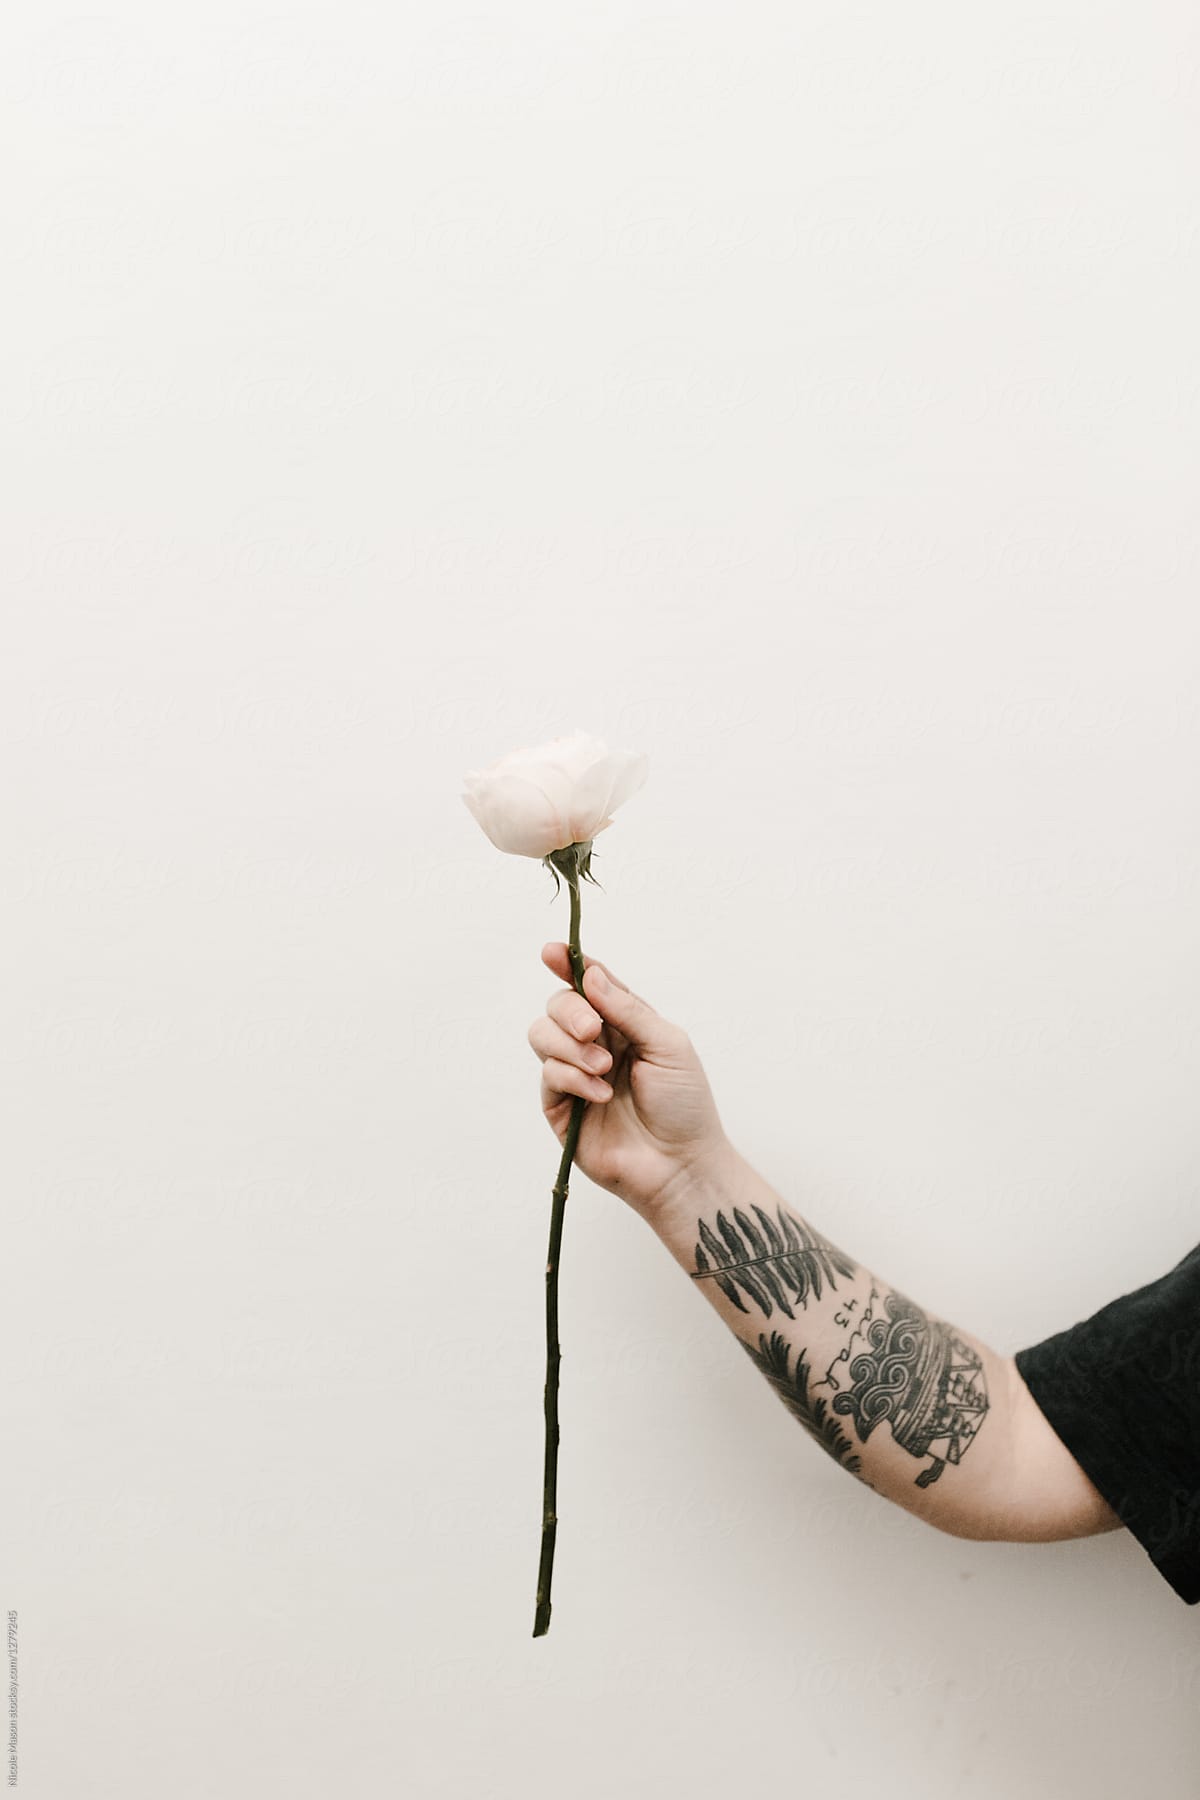 tattooed arm holding flower against white wall